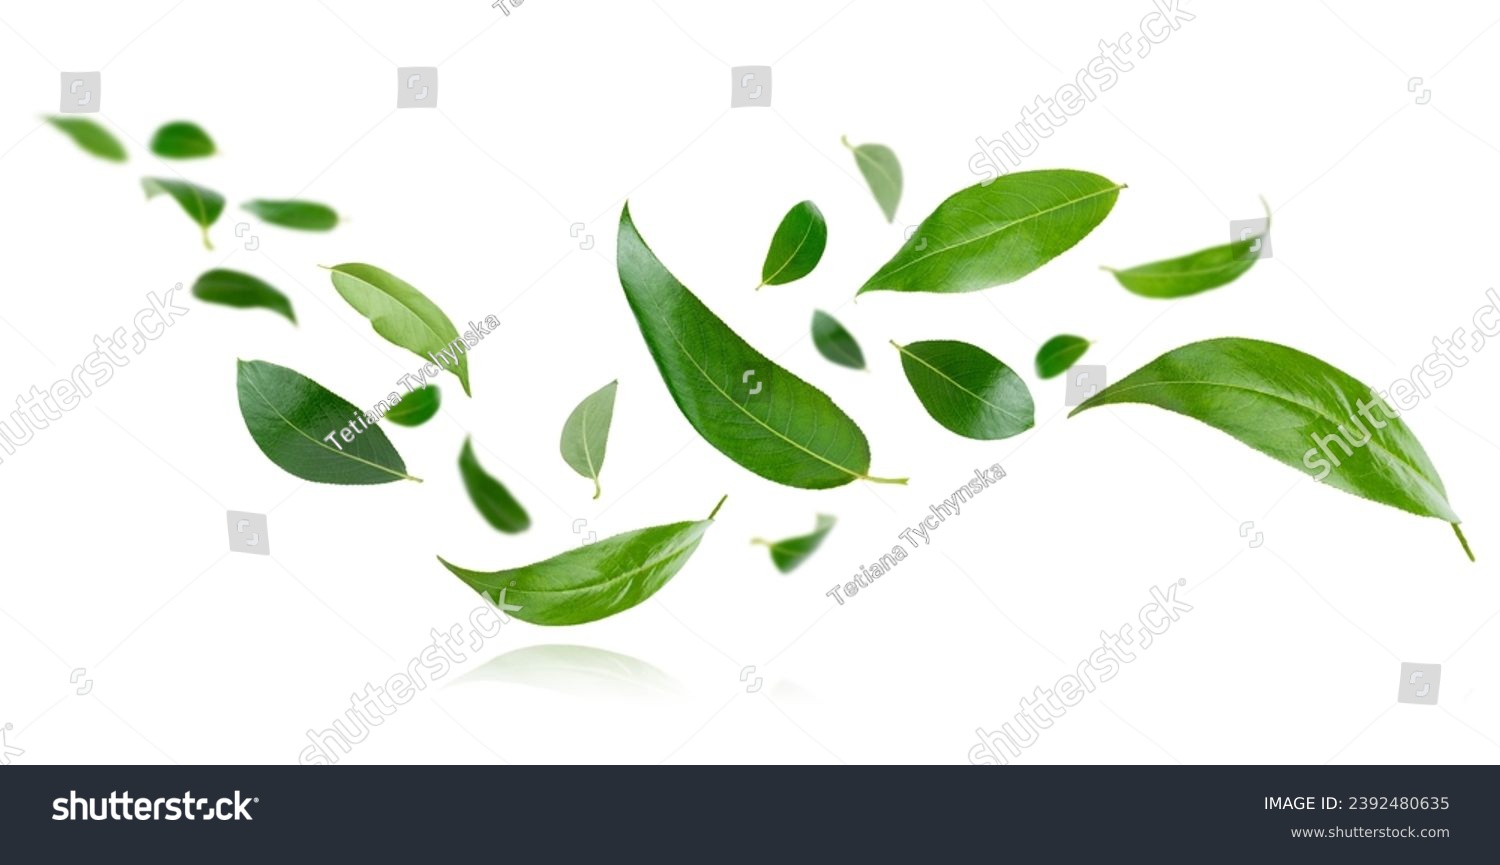 Flying green leaves isolated on white background. #2392480635